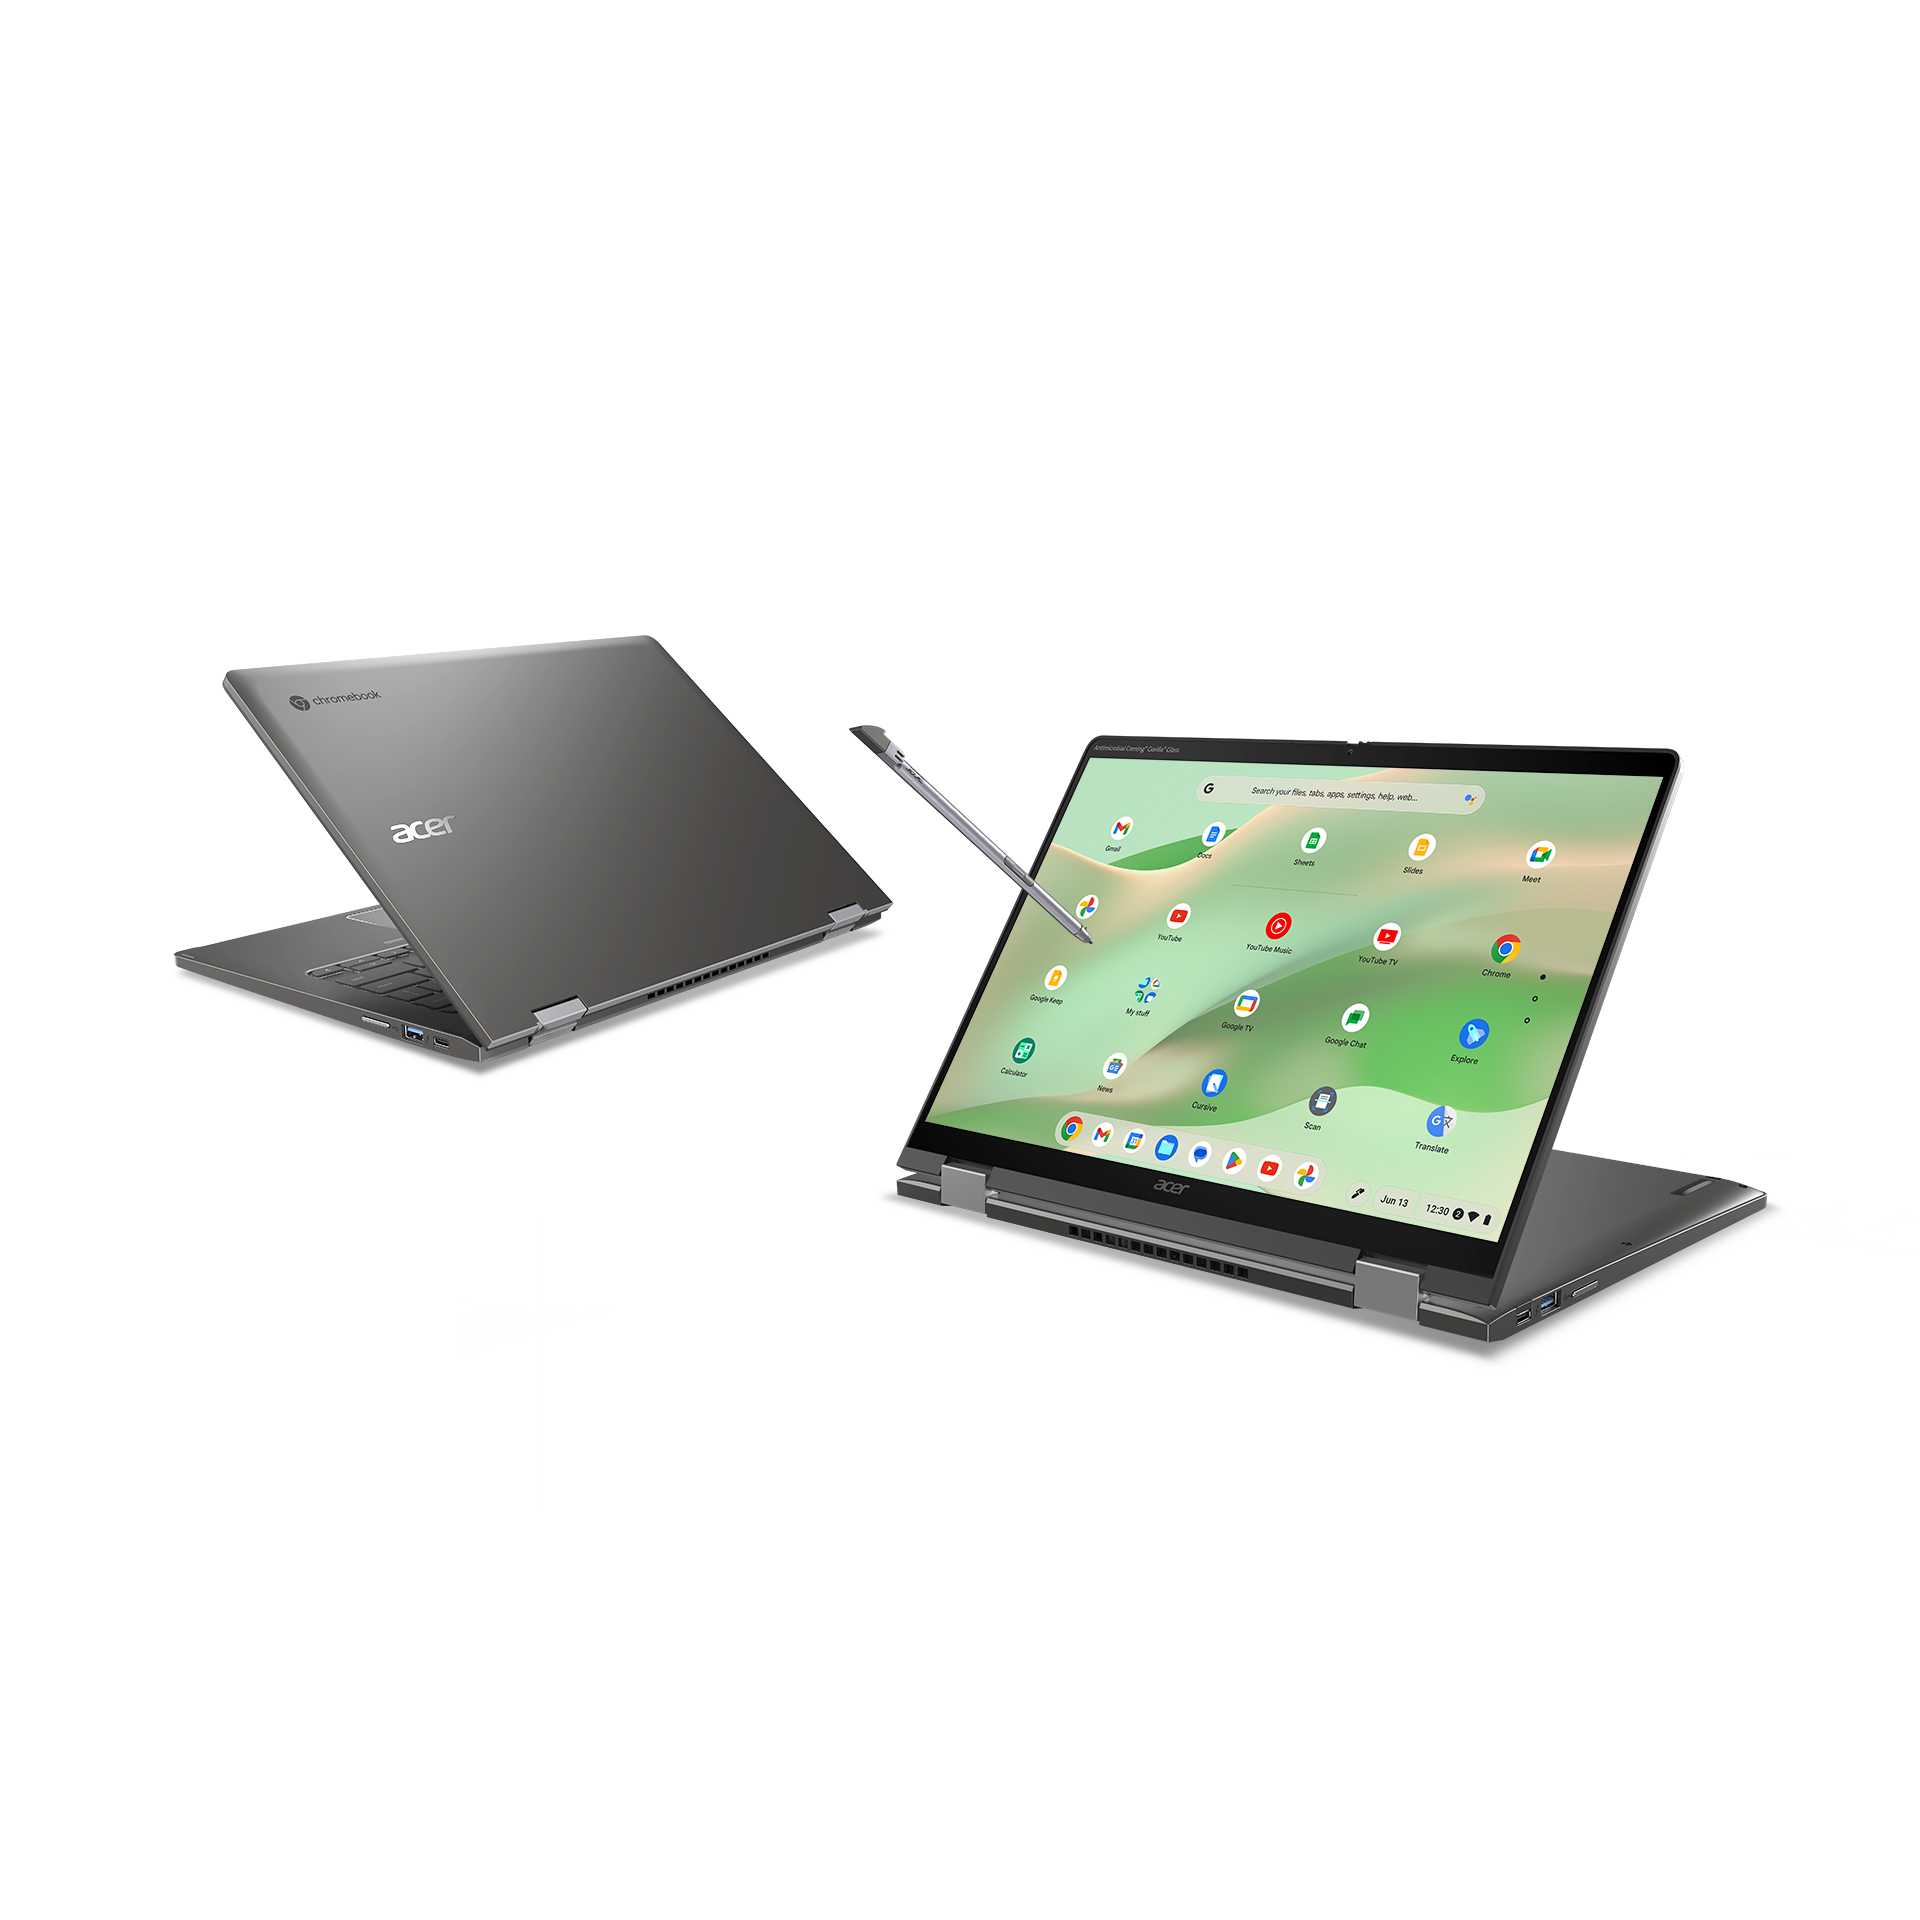 Acer Introduces Chromebook Spin 714, In Both Standard And Enterprise Editions 22